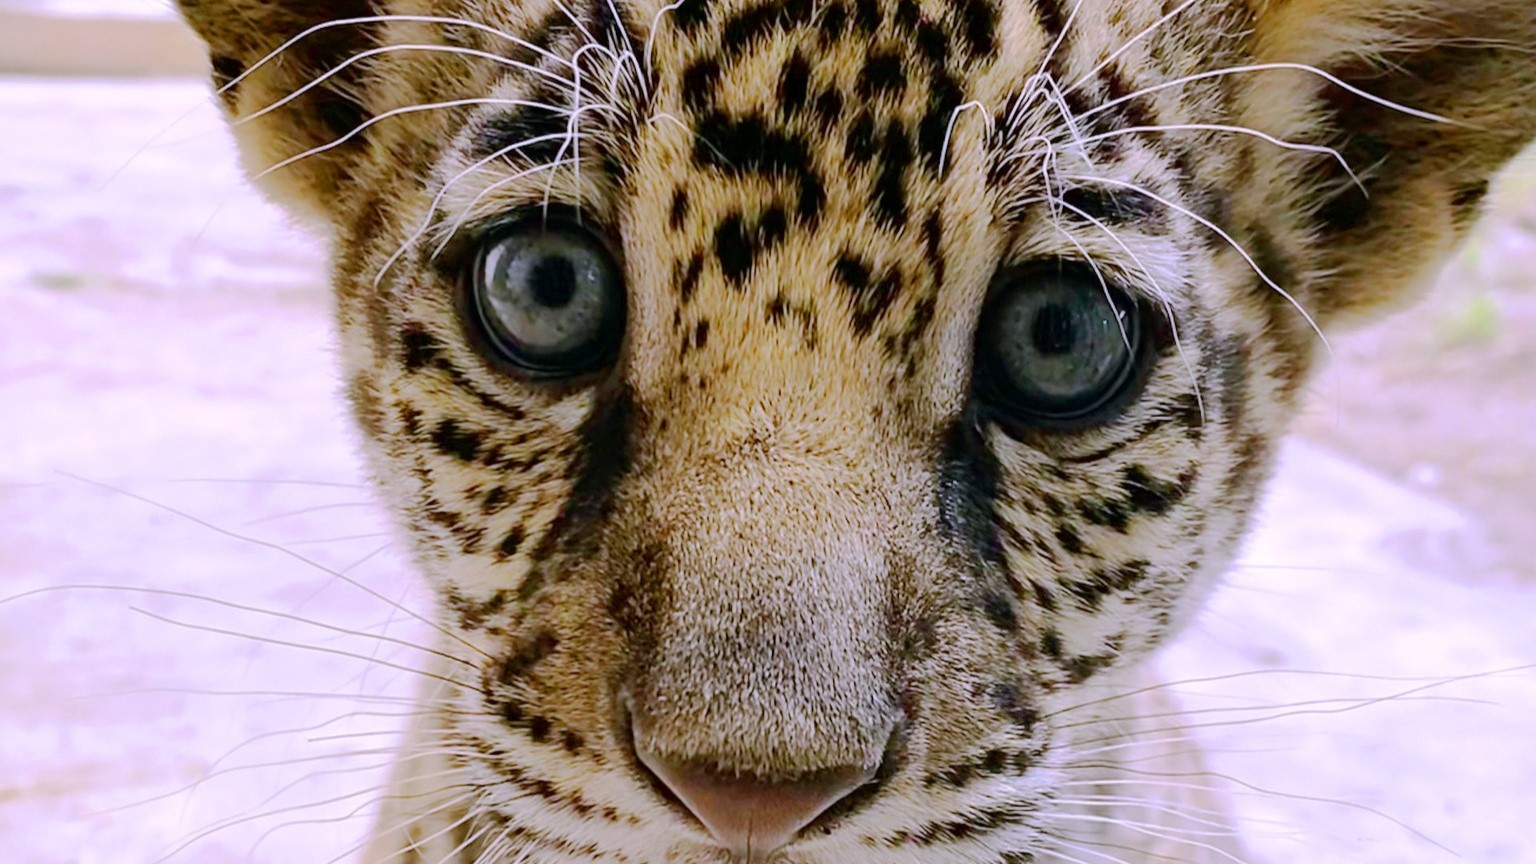 Featured image for “This baby Jaguar was just born at the zoo. He needs a name.”